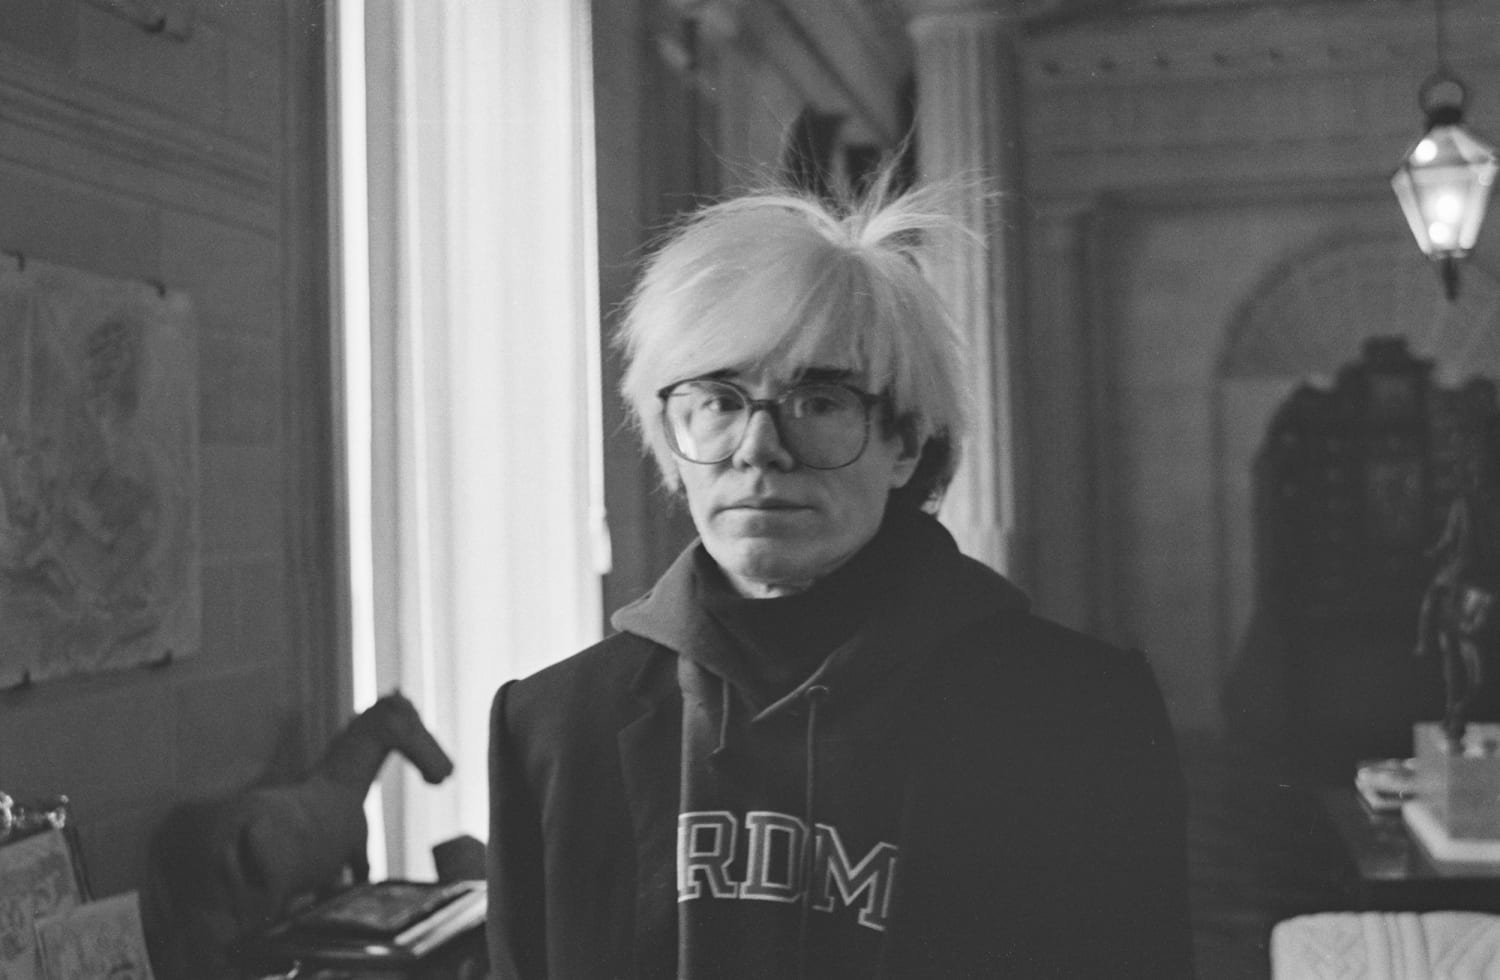 The Andy Warhol Diaries explores how the iconic artist was shaped by his great loves picture